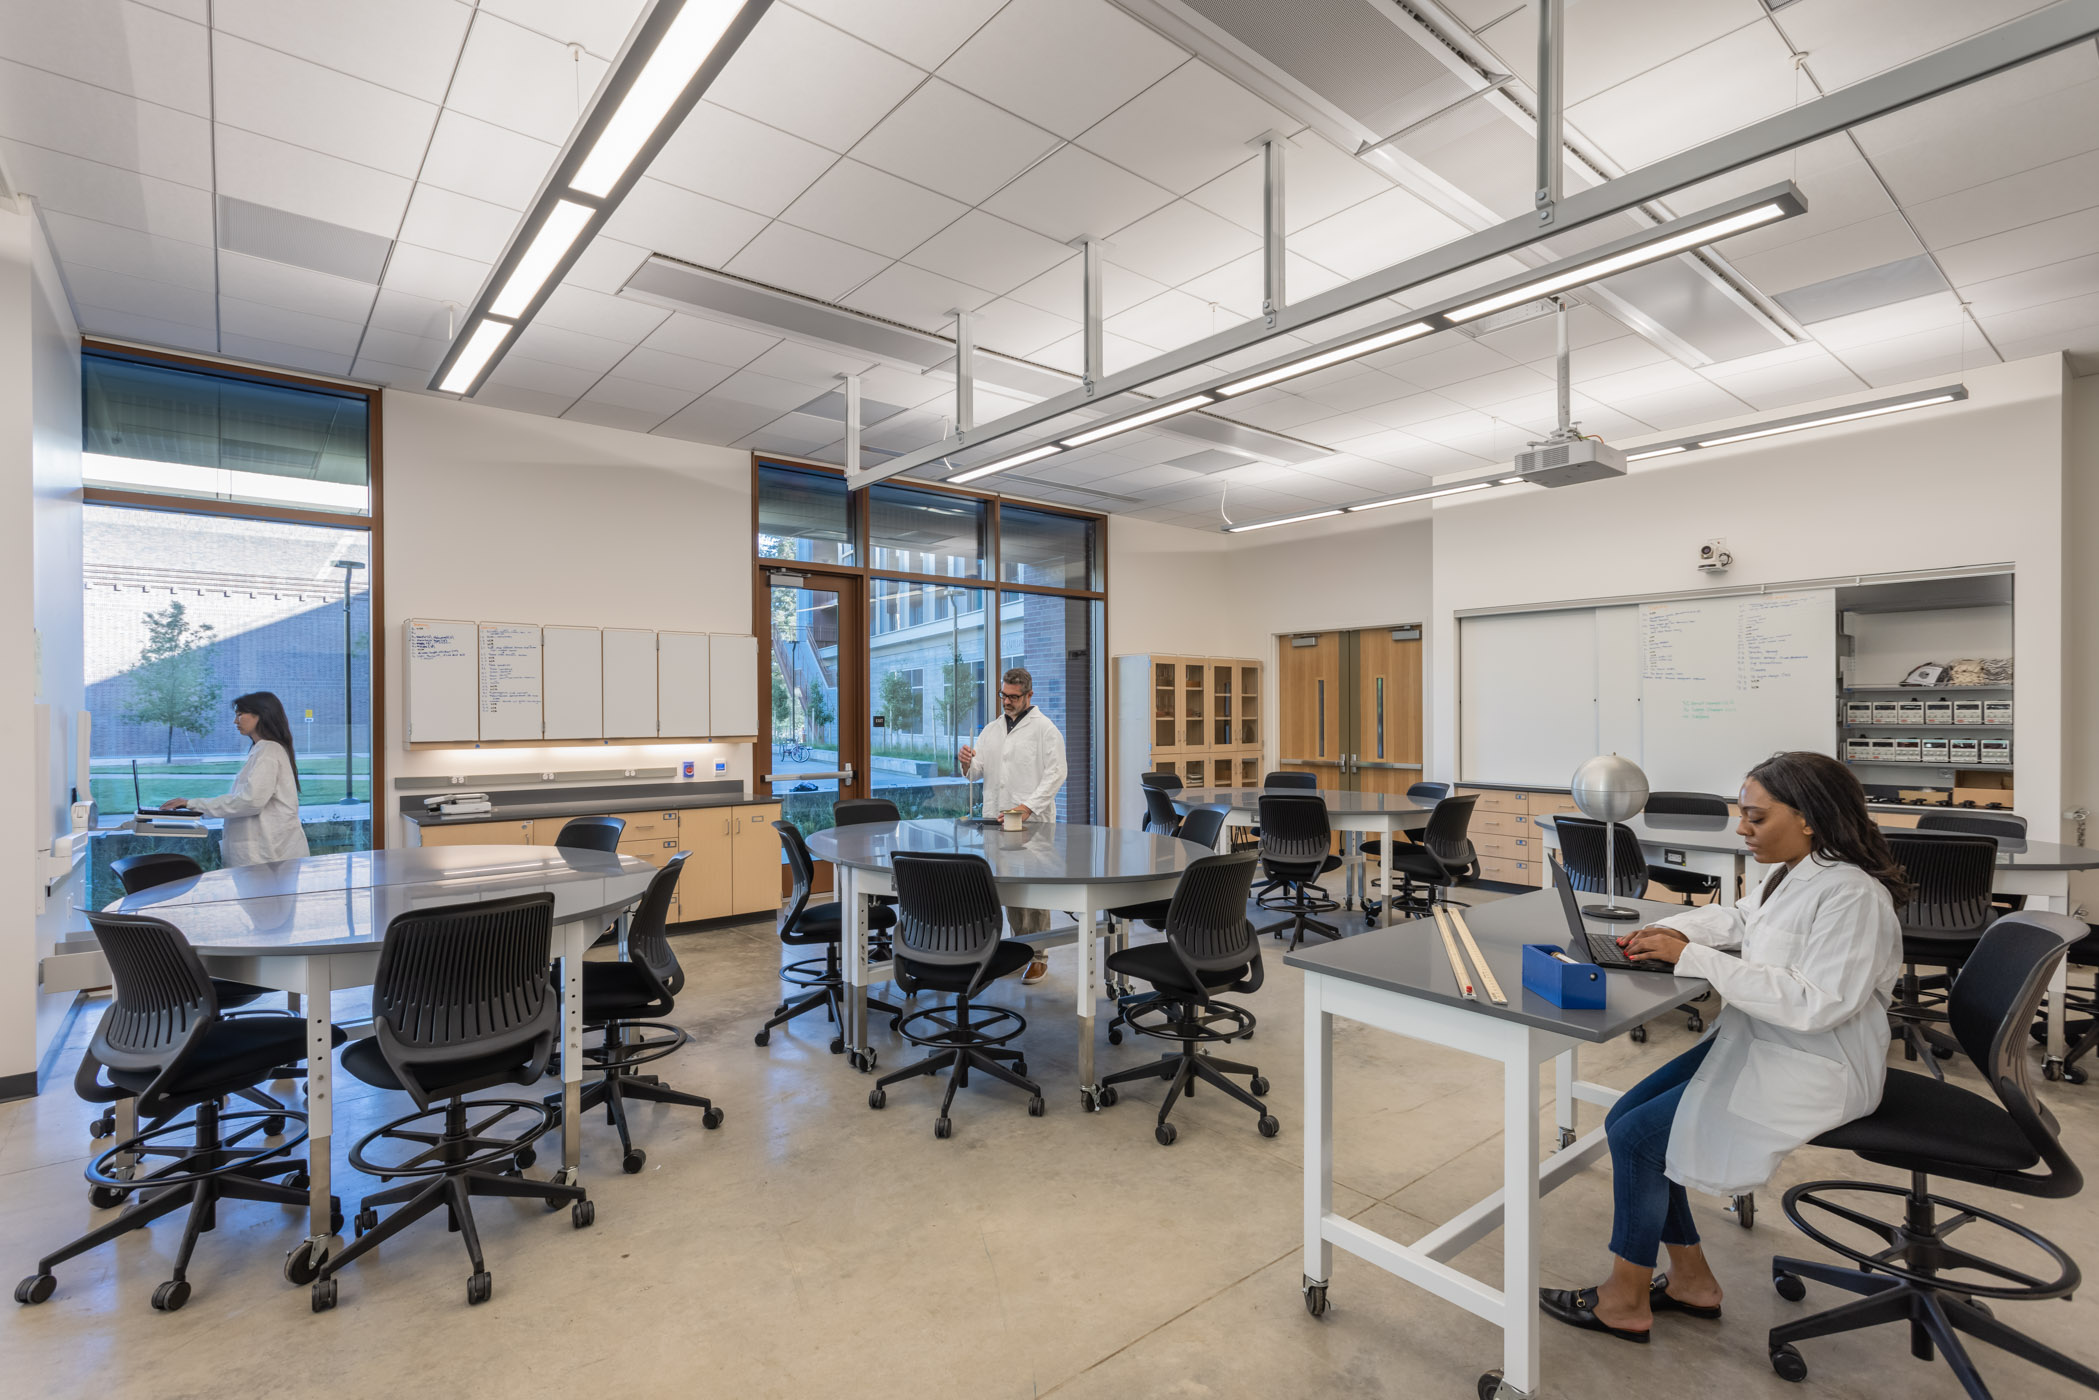 4-21_Smithgroup_ChicoState-4168-Edit-2_InstitutionsGallery